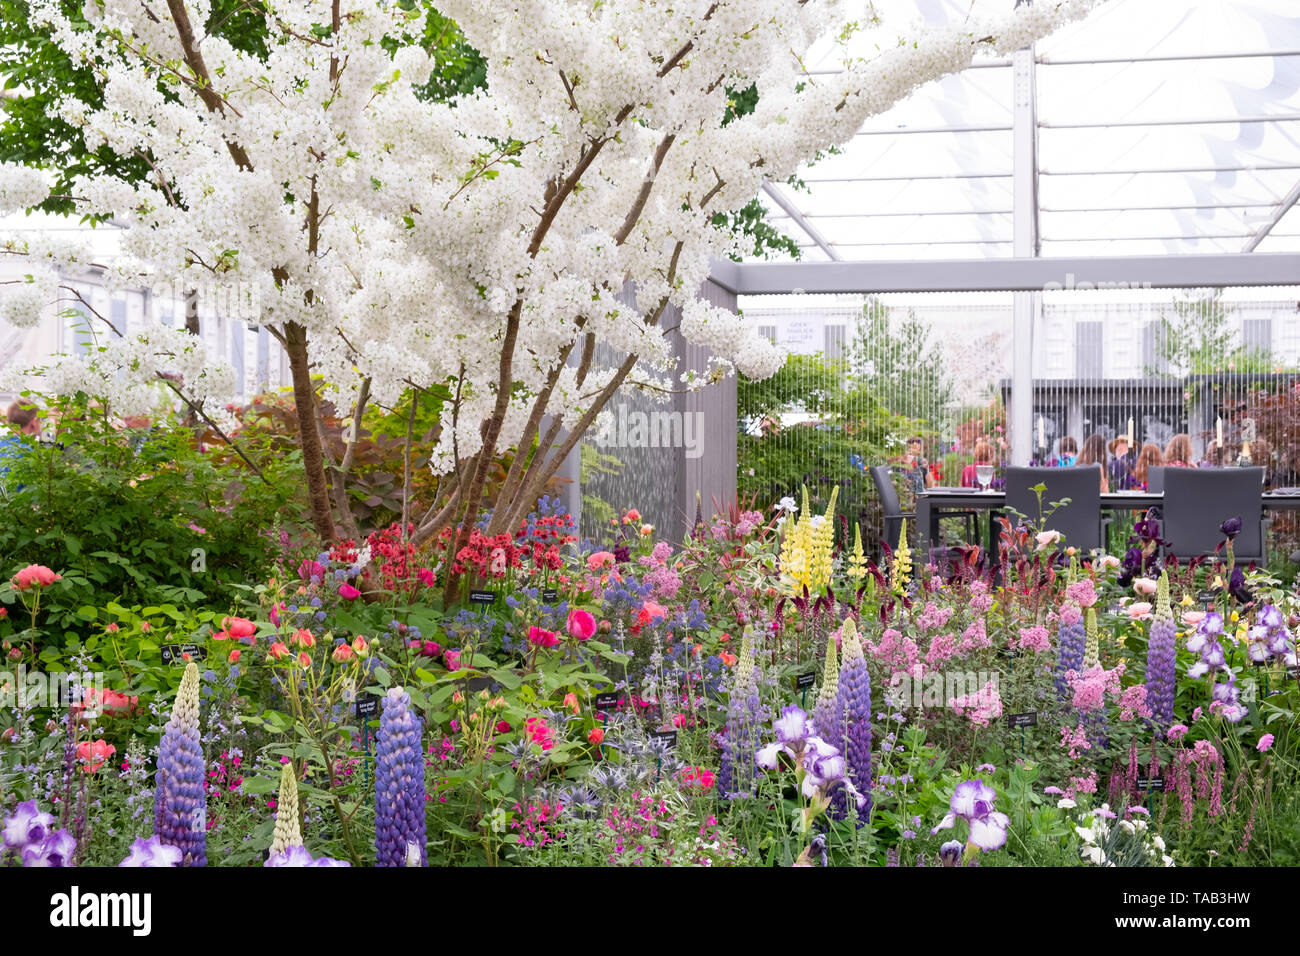 visitors at the rhs chelsea flower show 2019 around the hillier